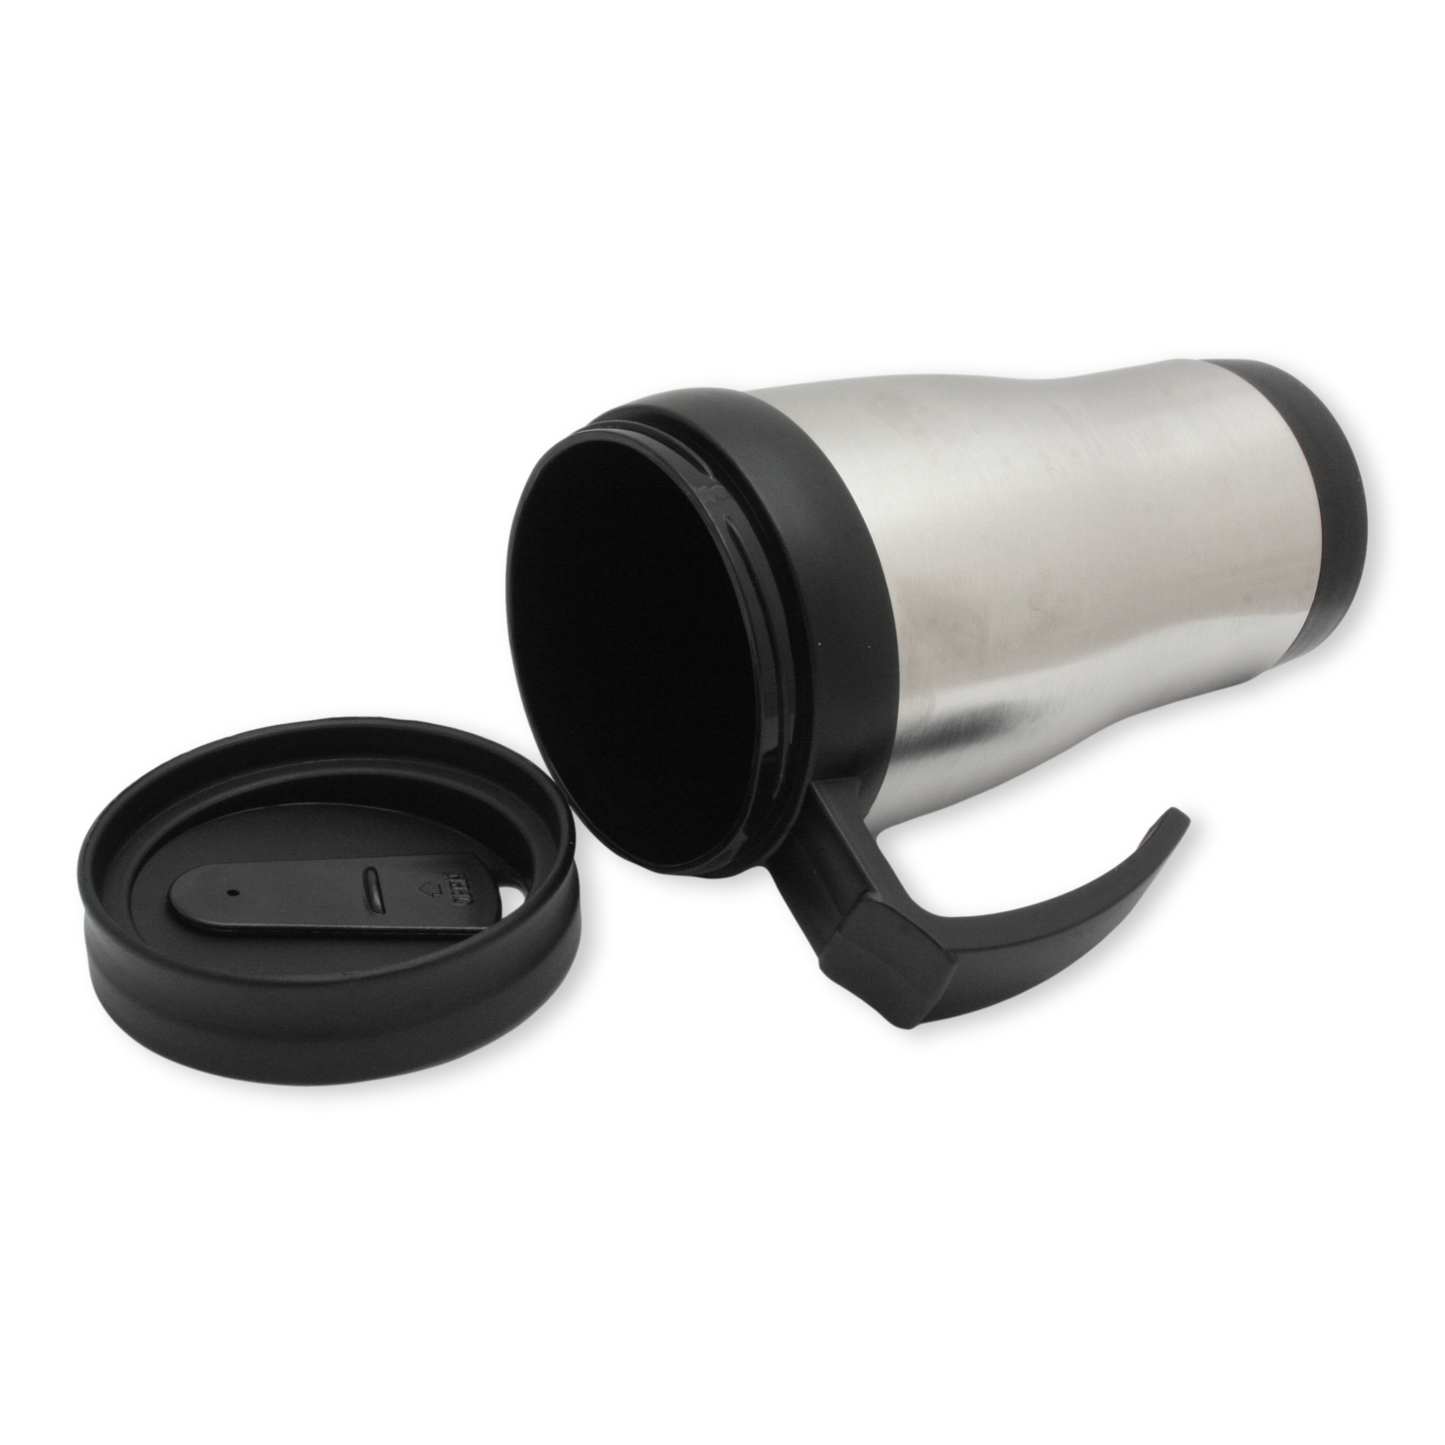 Labrador Head Insulated Thermal Mug Stainless Steel